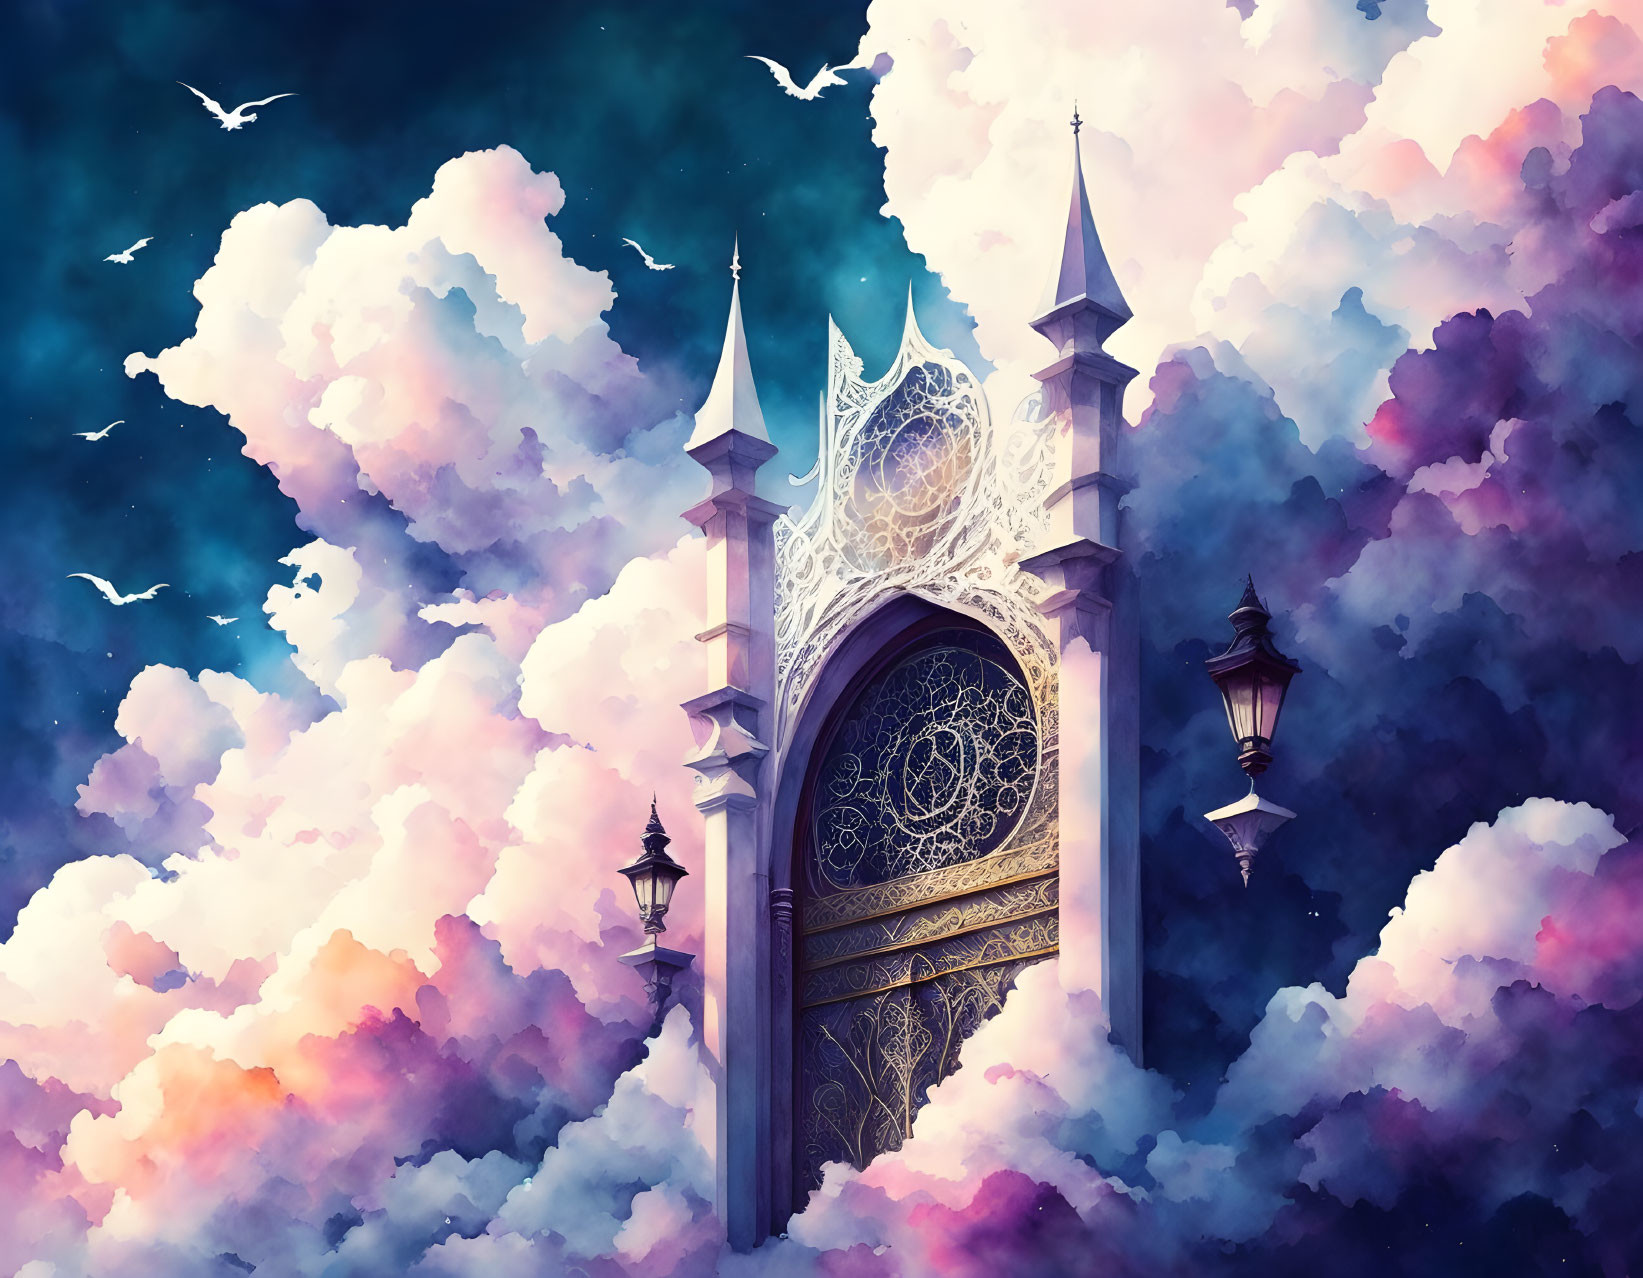 Ornate Fantasy Gate with Spires in Colorful Clouds